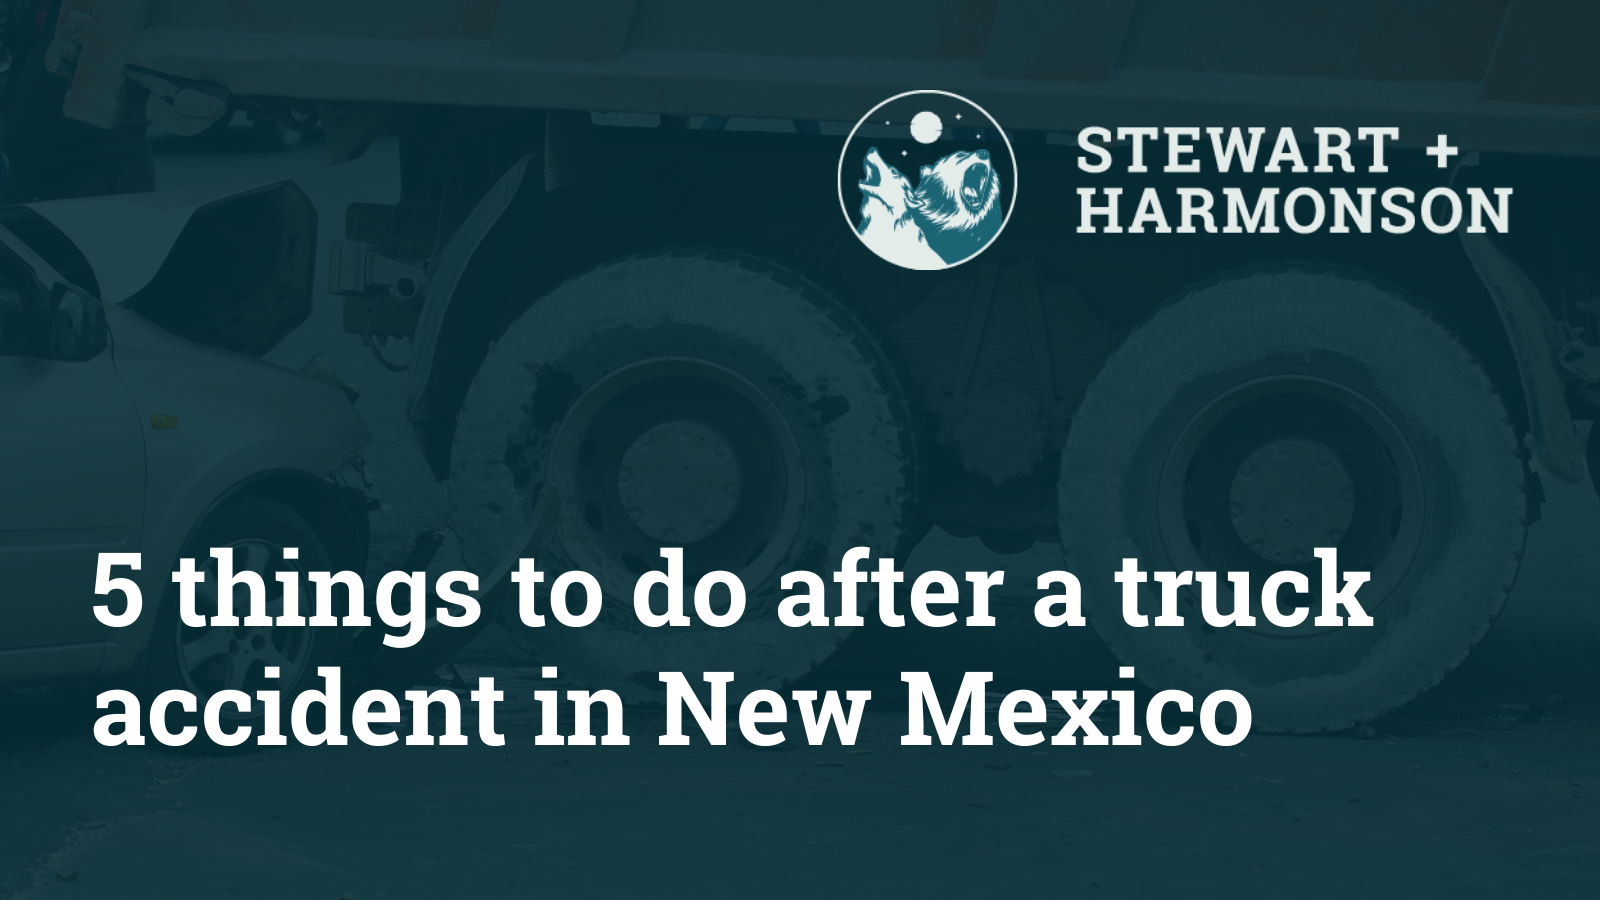 things to do after a truck accident in New Mexico - Stewart Harmonson Law Firm - New Mexico